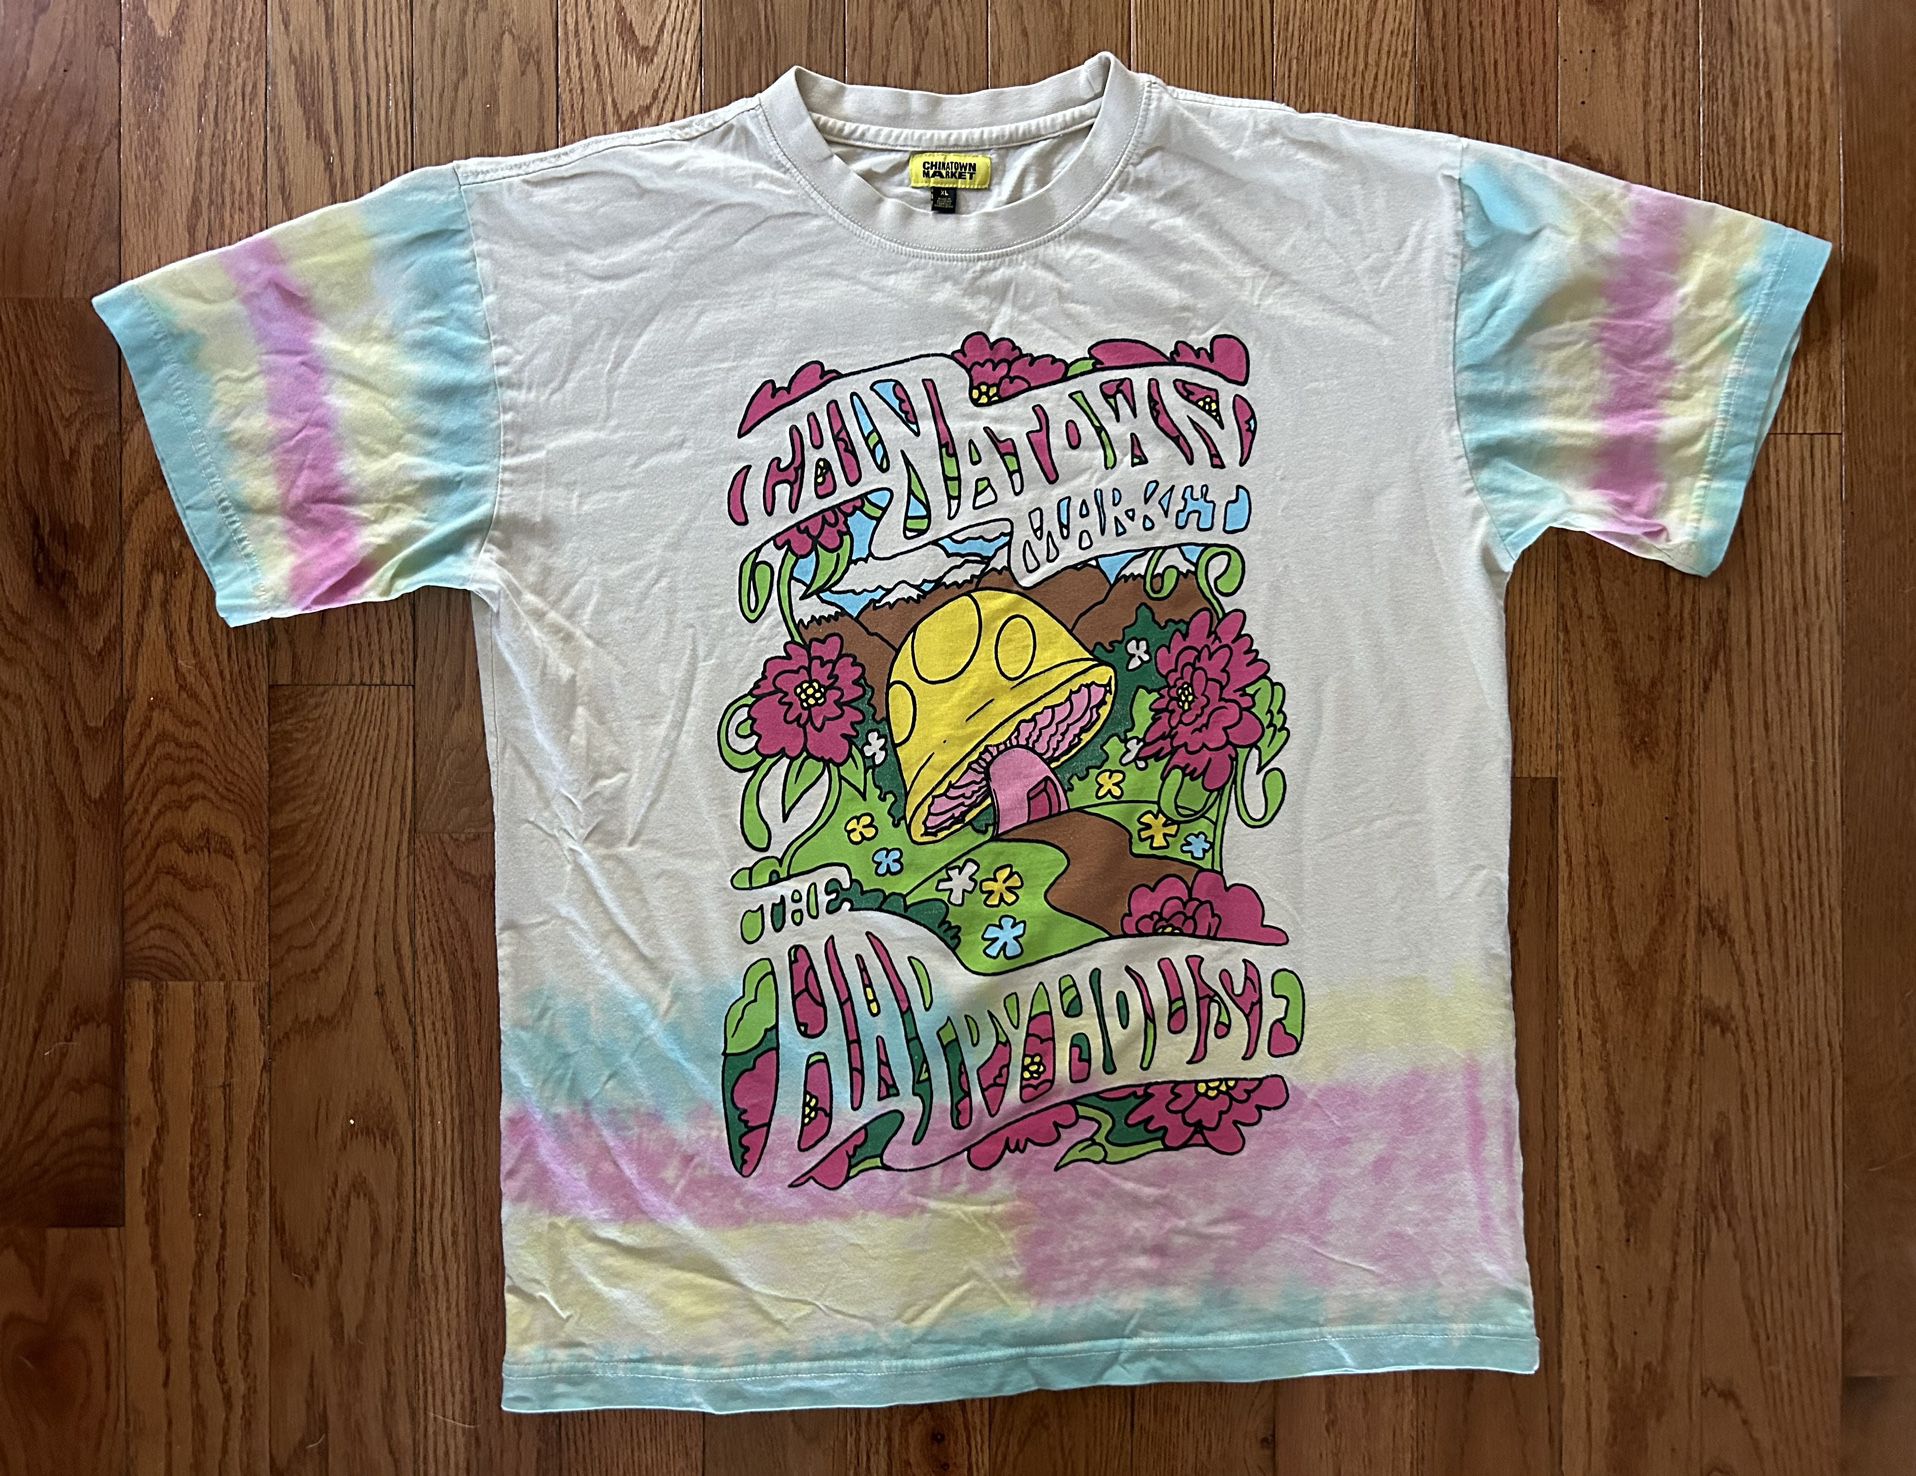 Chinatown Market “The Happy House” T-Shirt Size XL